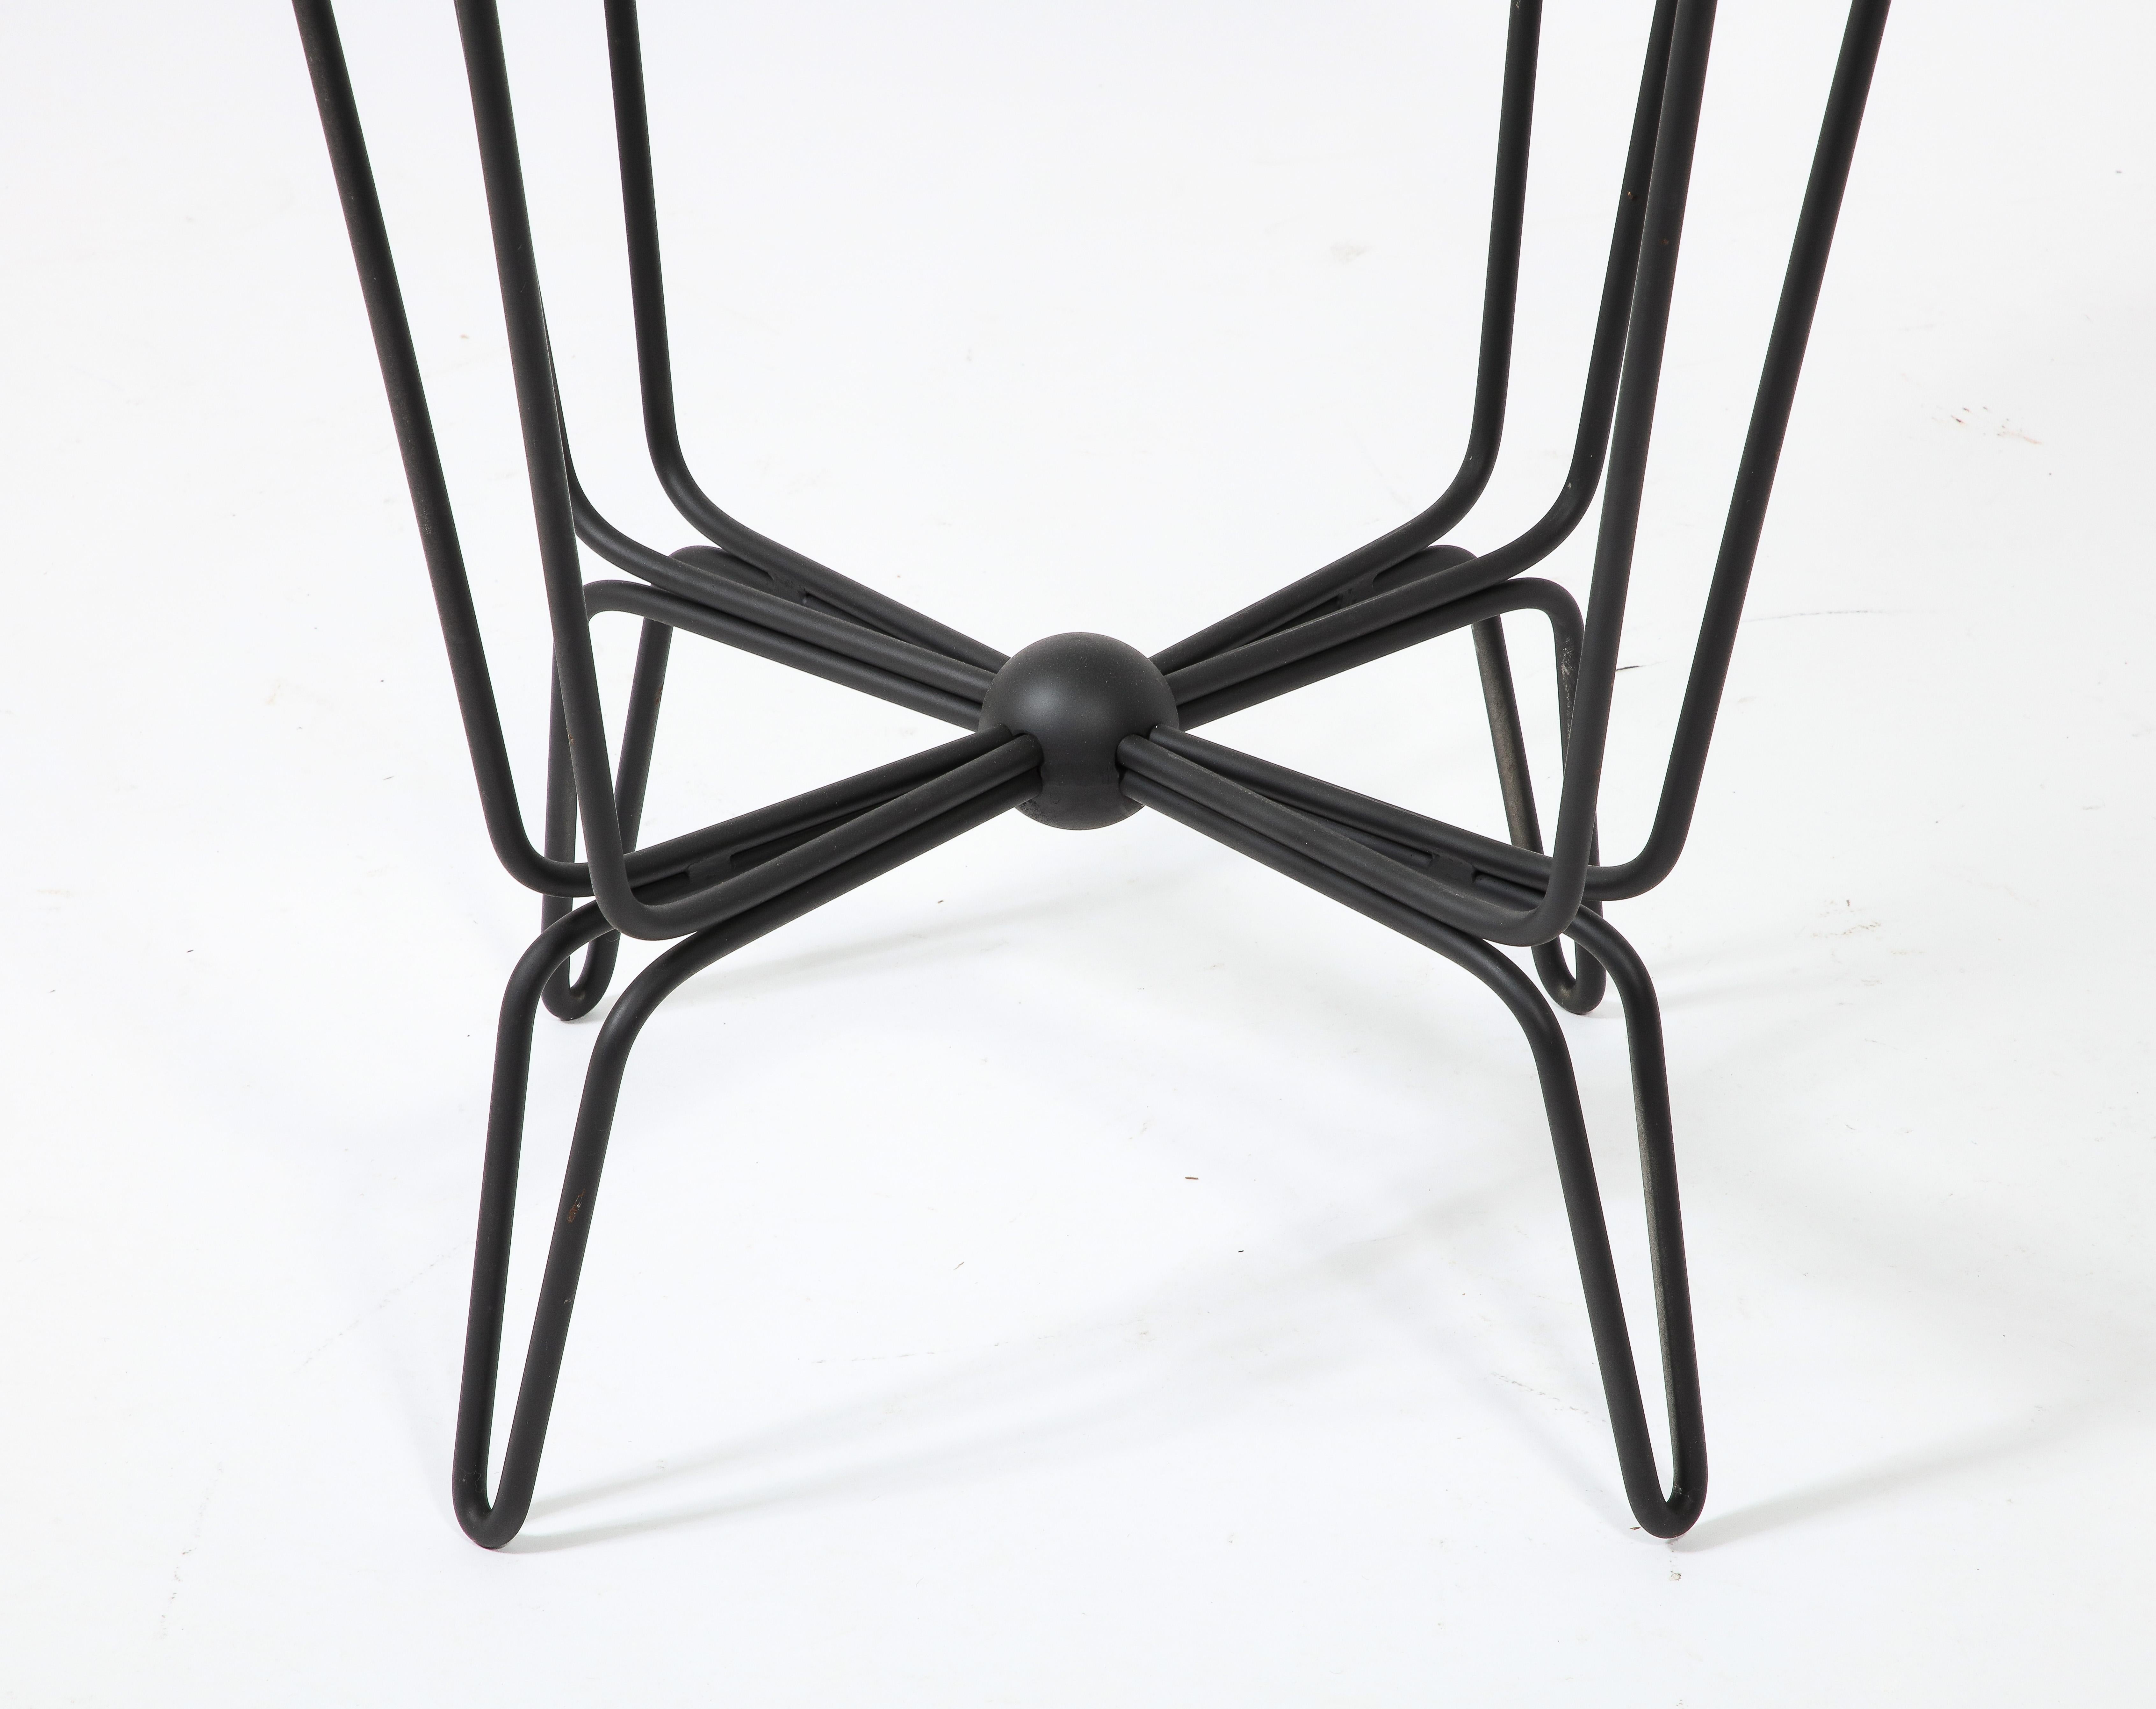 Elegant wrought iron and glass center table with a Saint Gobain top, the base is a double-looped rod that gracefully connects to a sphere in the center. The model is a variation of the tropiques series, most likely made for indoor use.